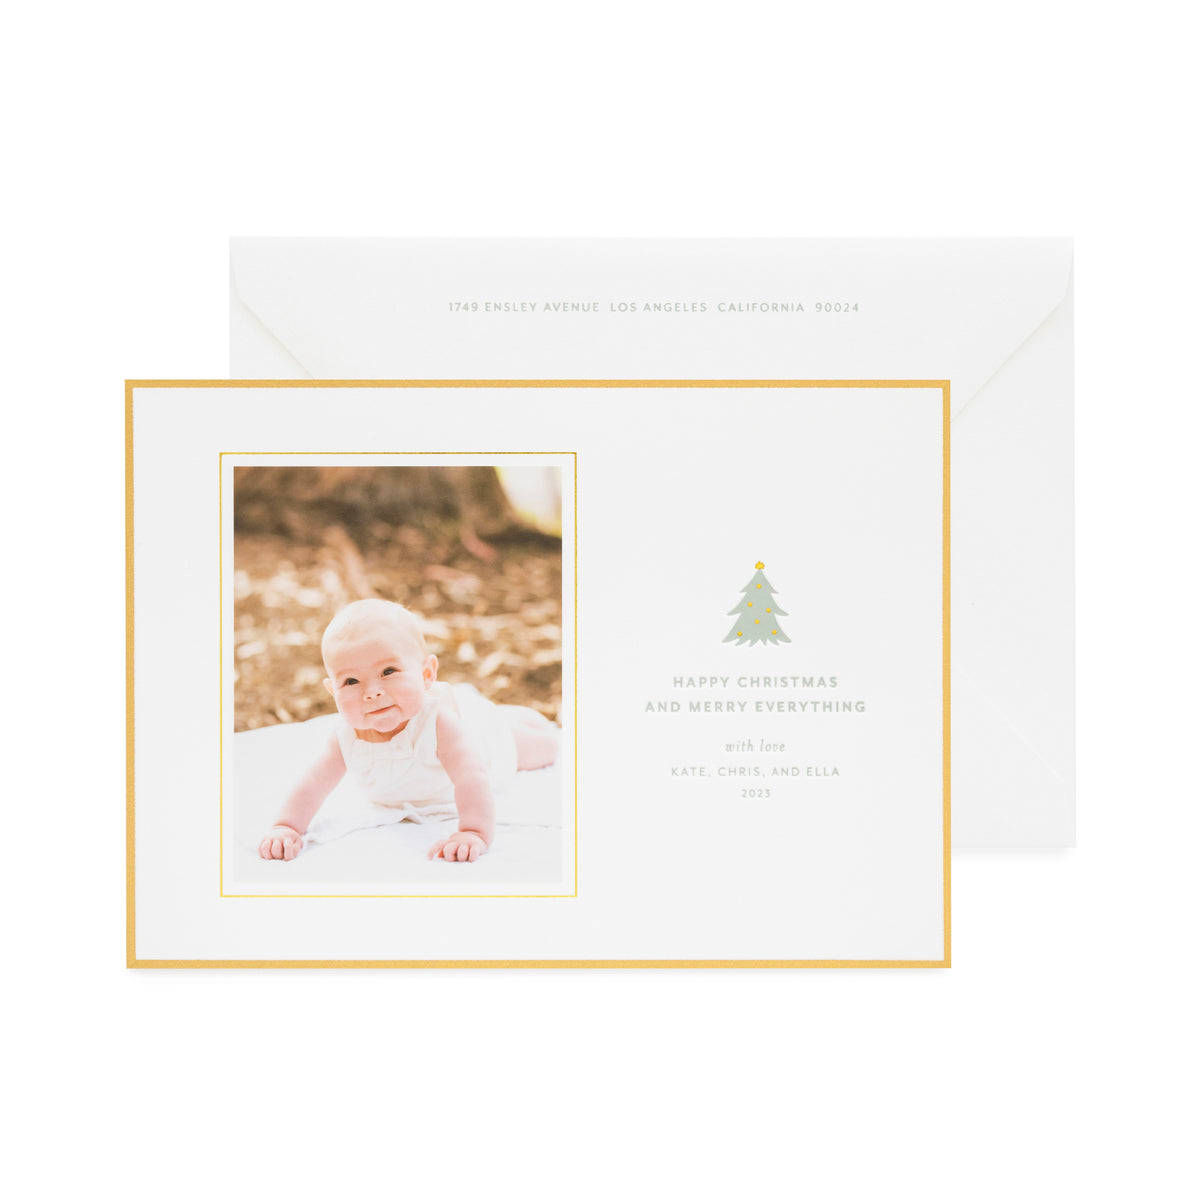 Gold bordered holiday photo card with green christmas tree icon